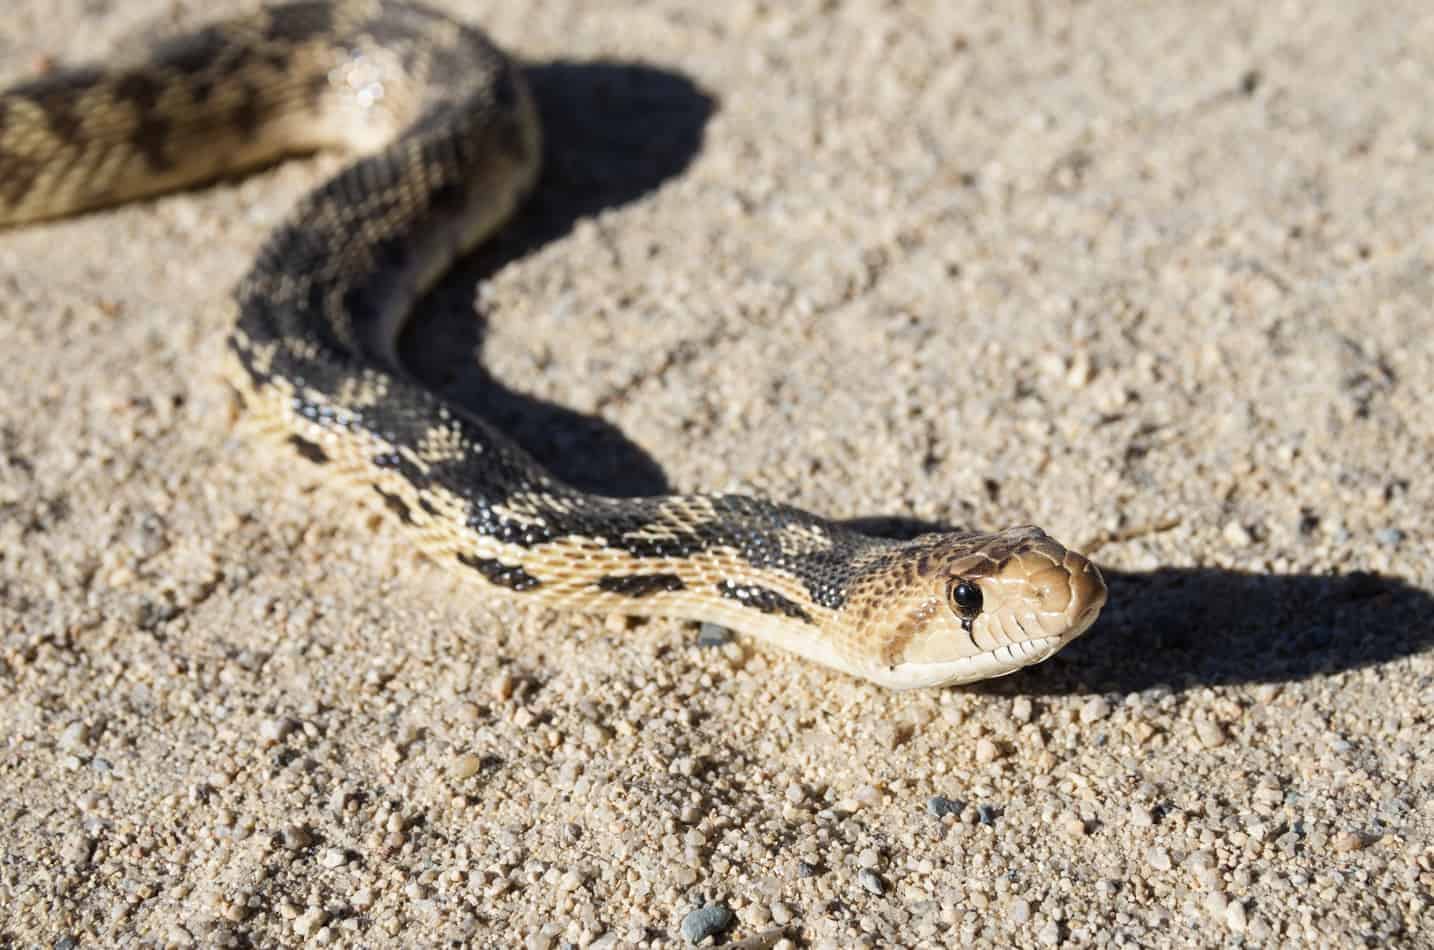 Vernon preservation official: Wild gopher snakes aren’t pets